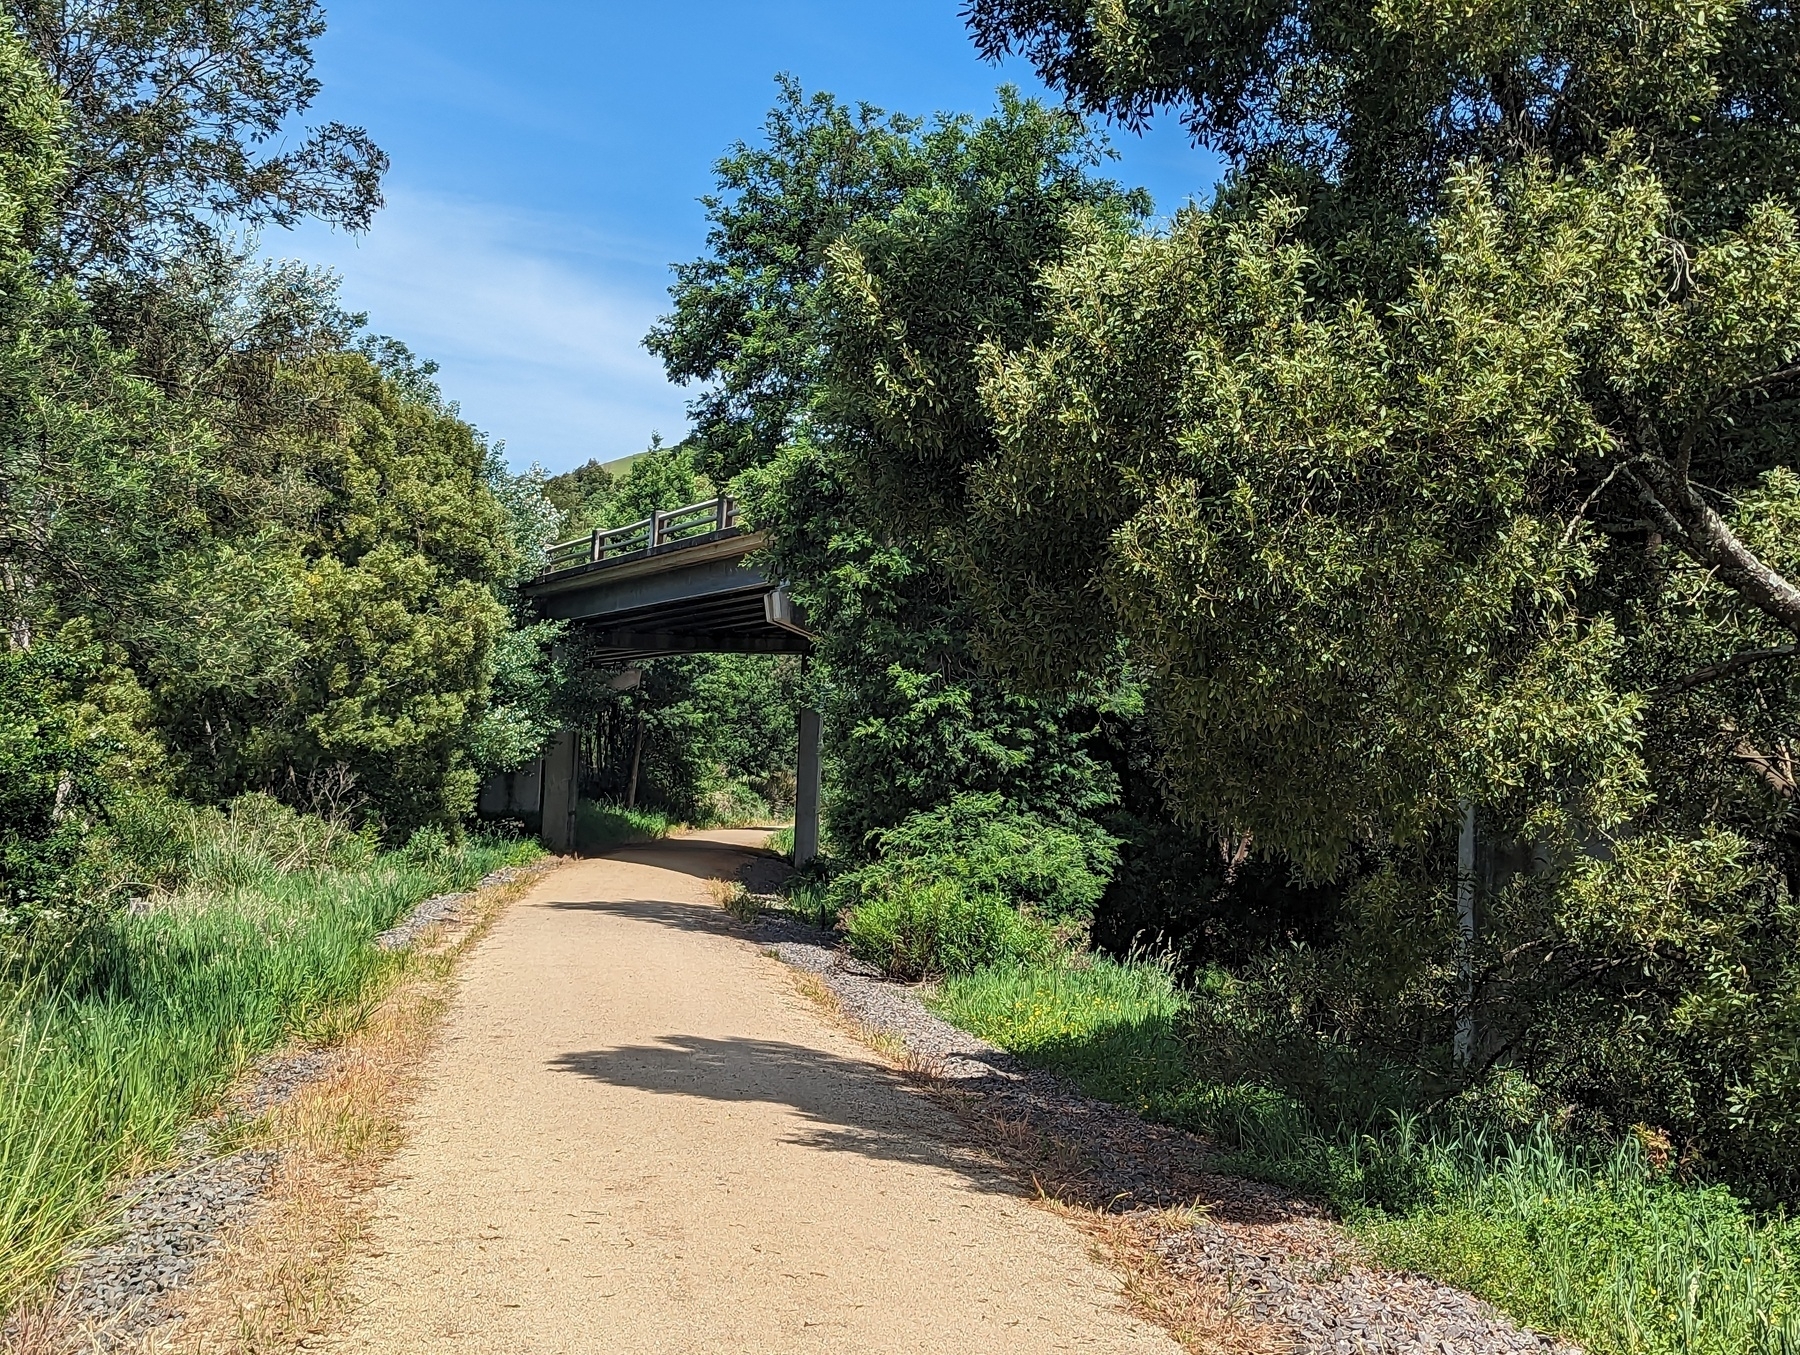 The rail trail approaching the South Gippsland Highway which crosses the trail and a creek via a bridge